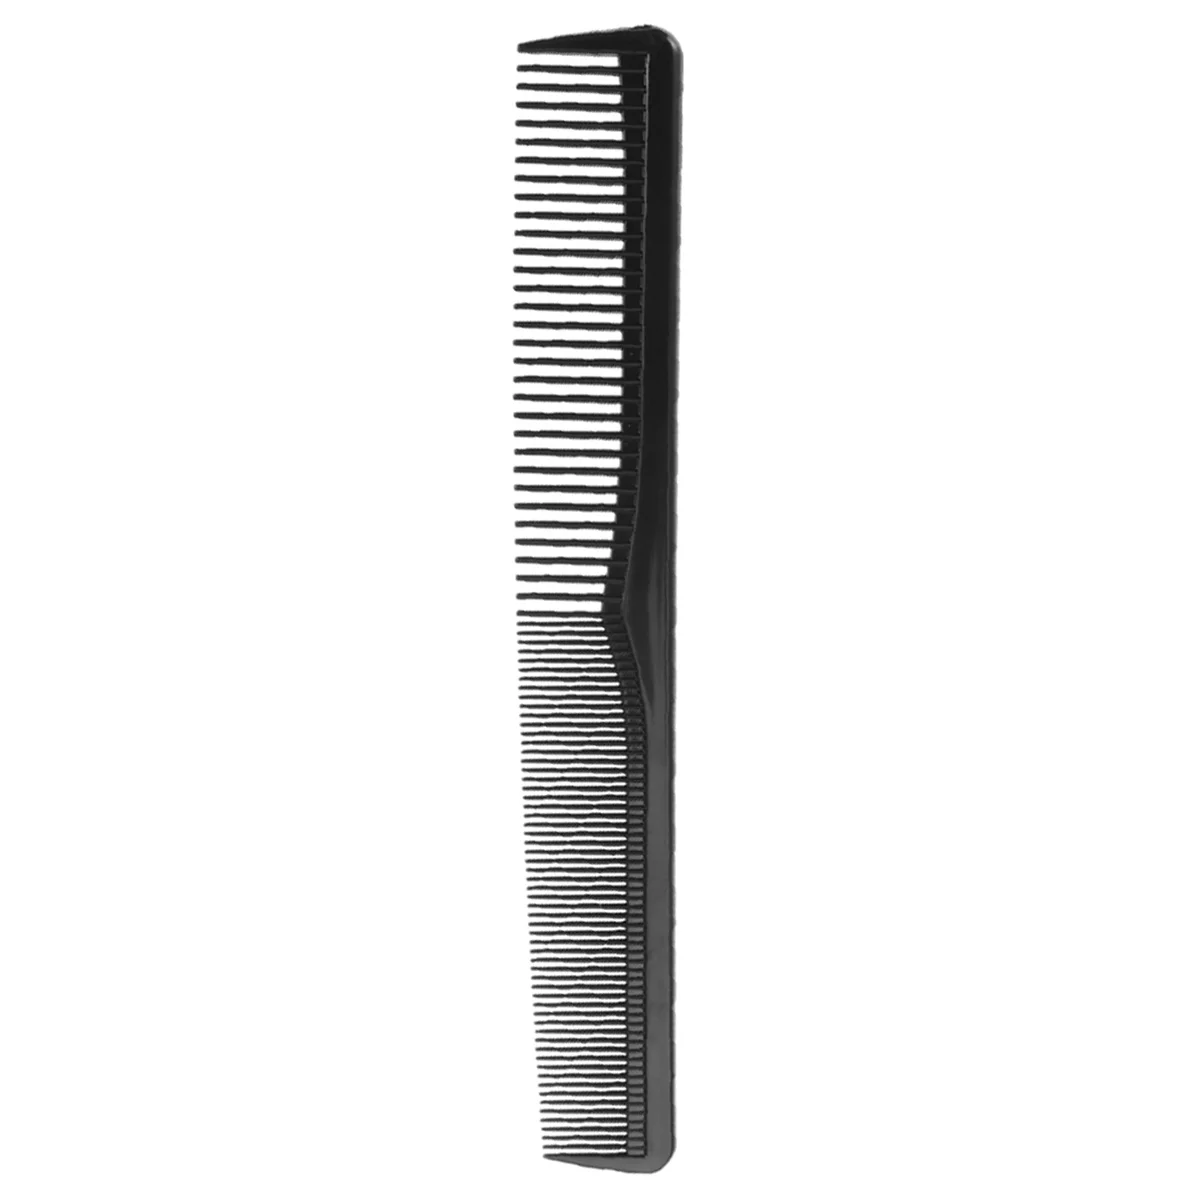 Practical Compact Plastic Anti-Static Tooth Design Hairdressing Double Side Pettine Hair Combs Hairbrush For Salon Home